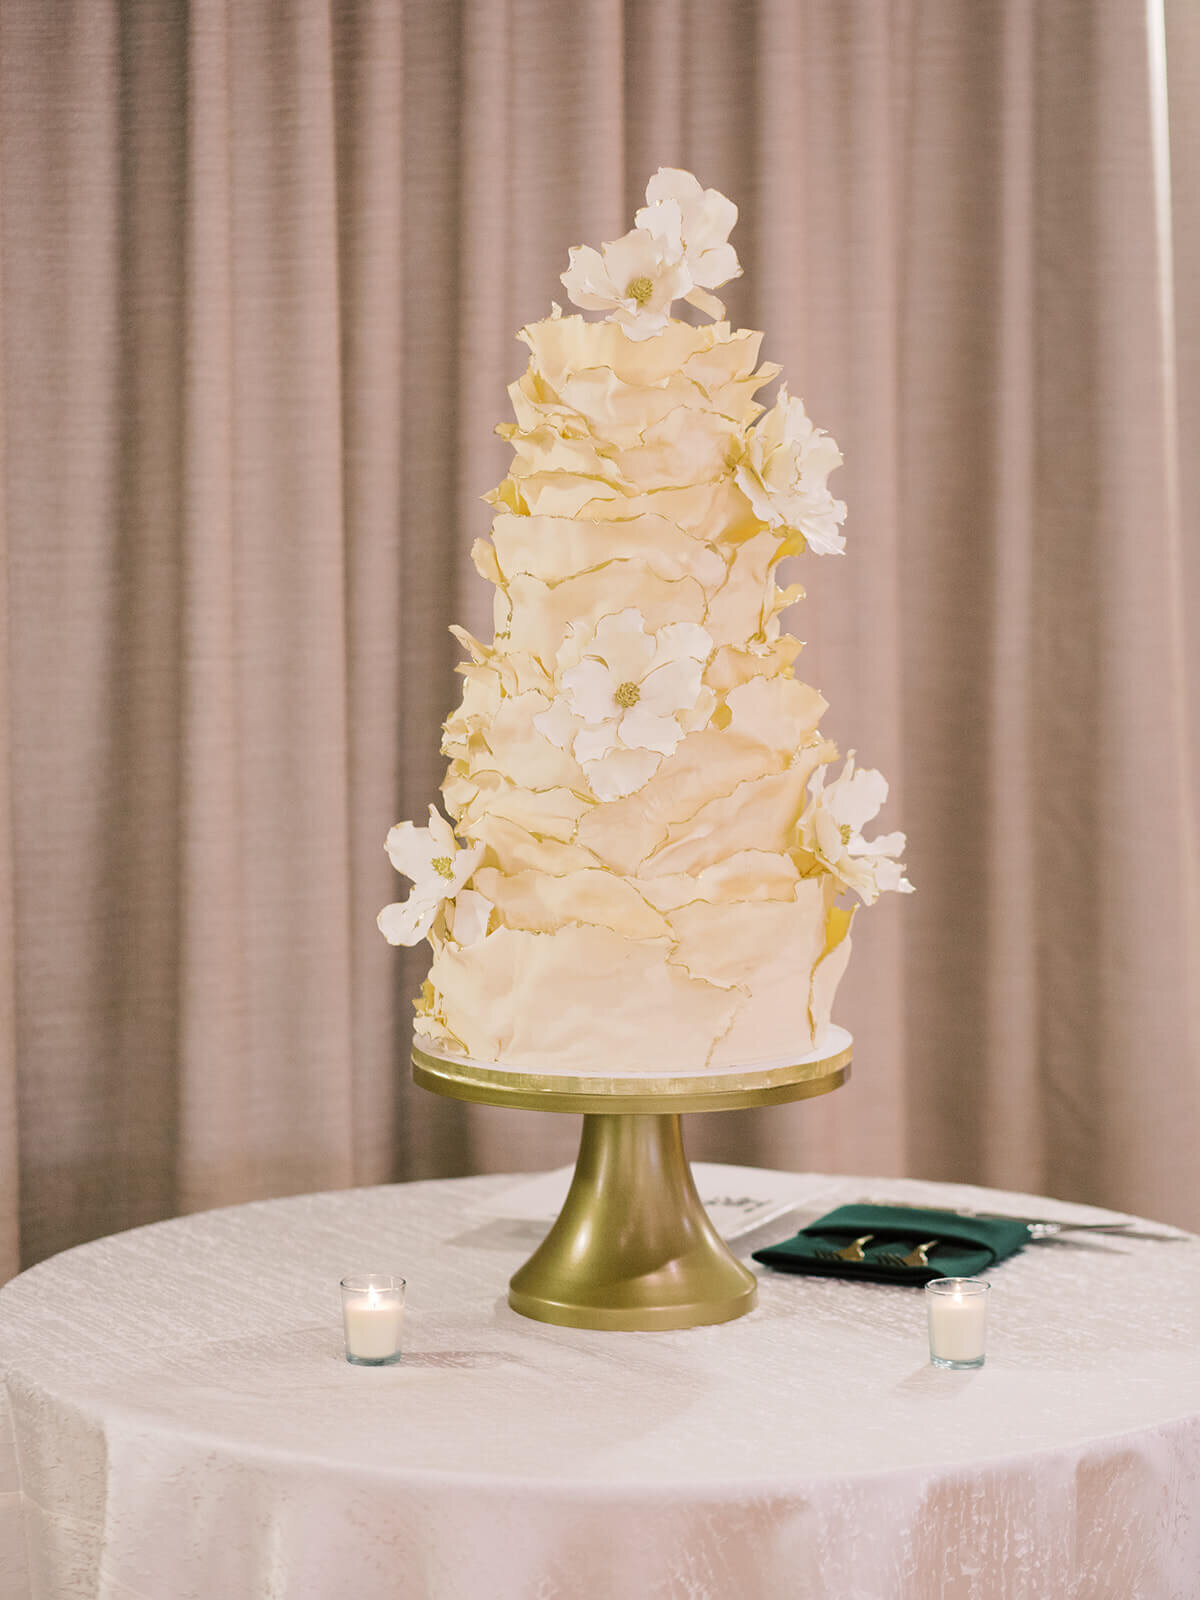 Custom fairytale wedding cake with floral accents on a gold stand